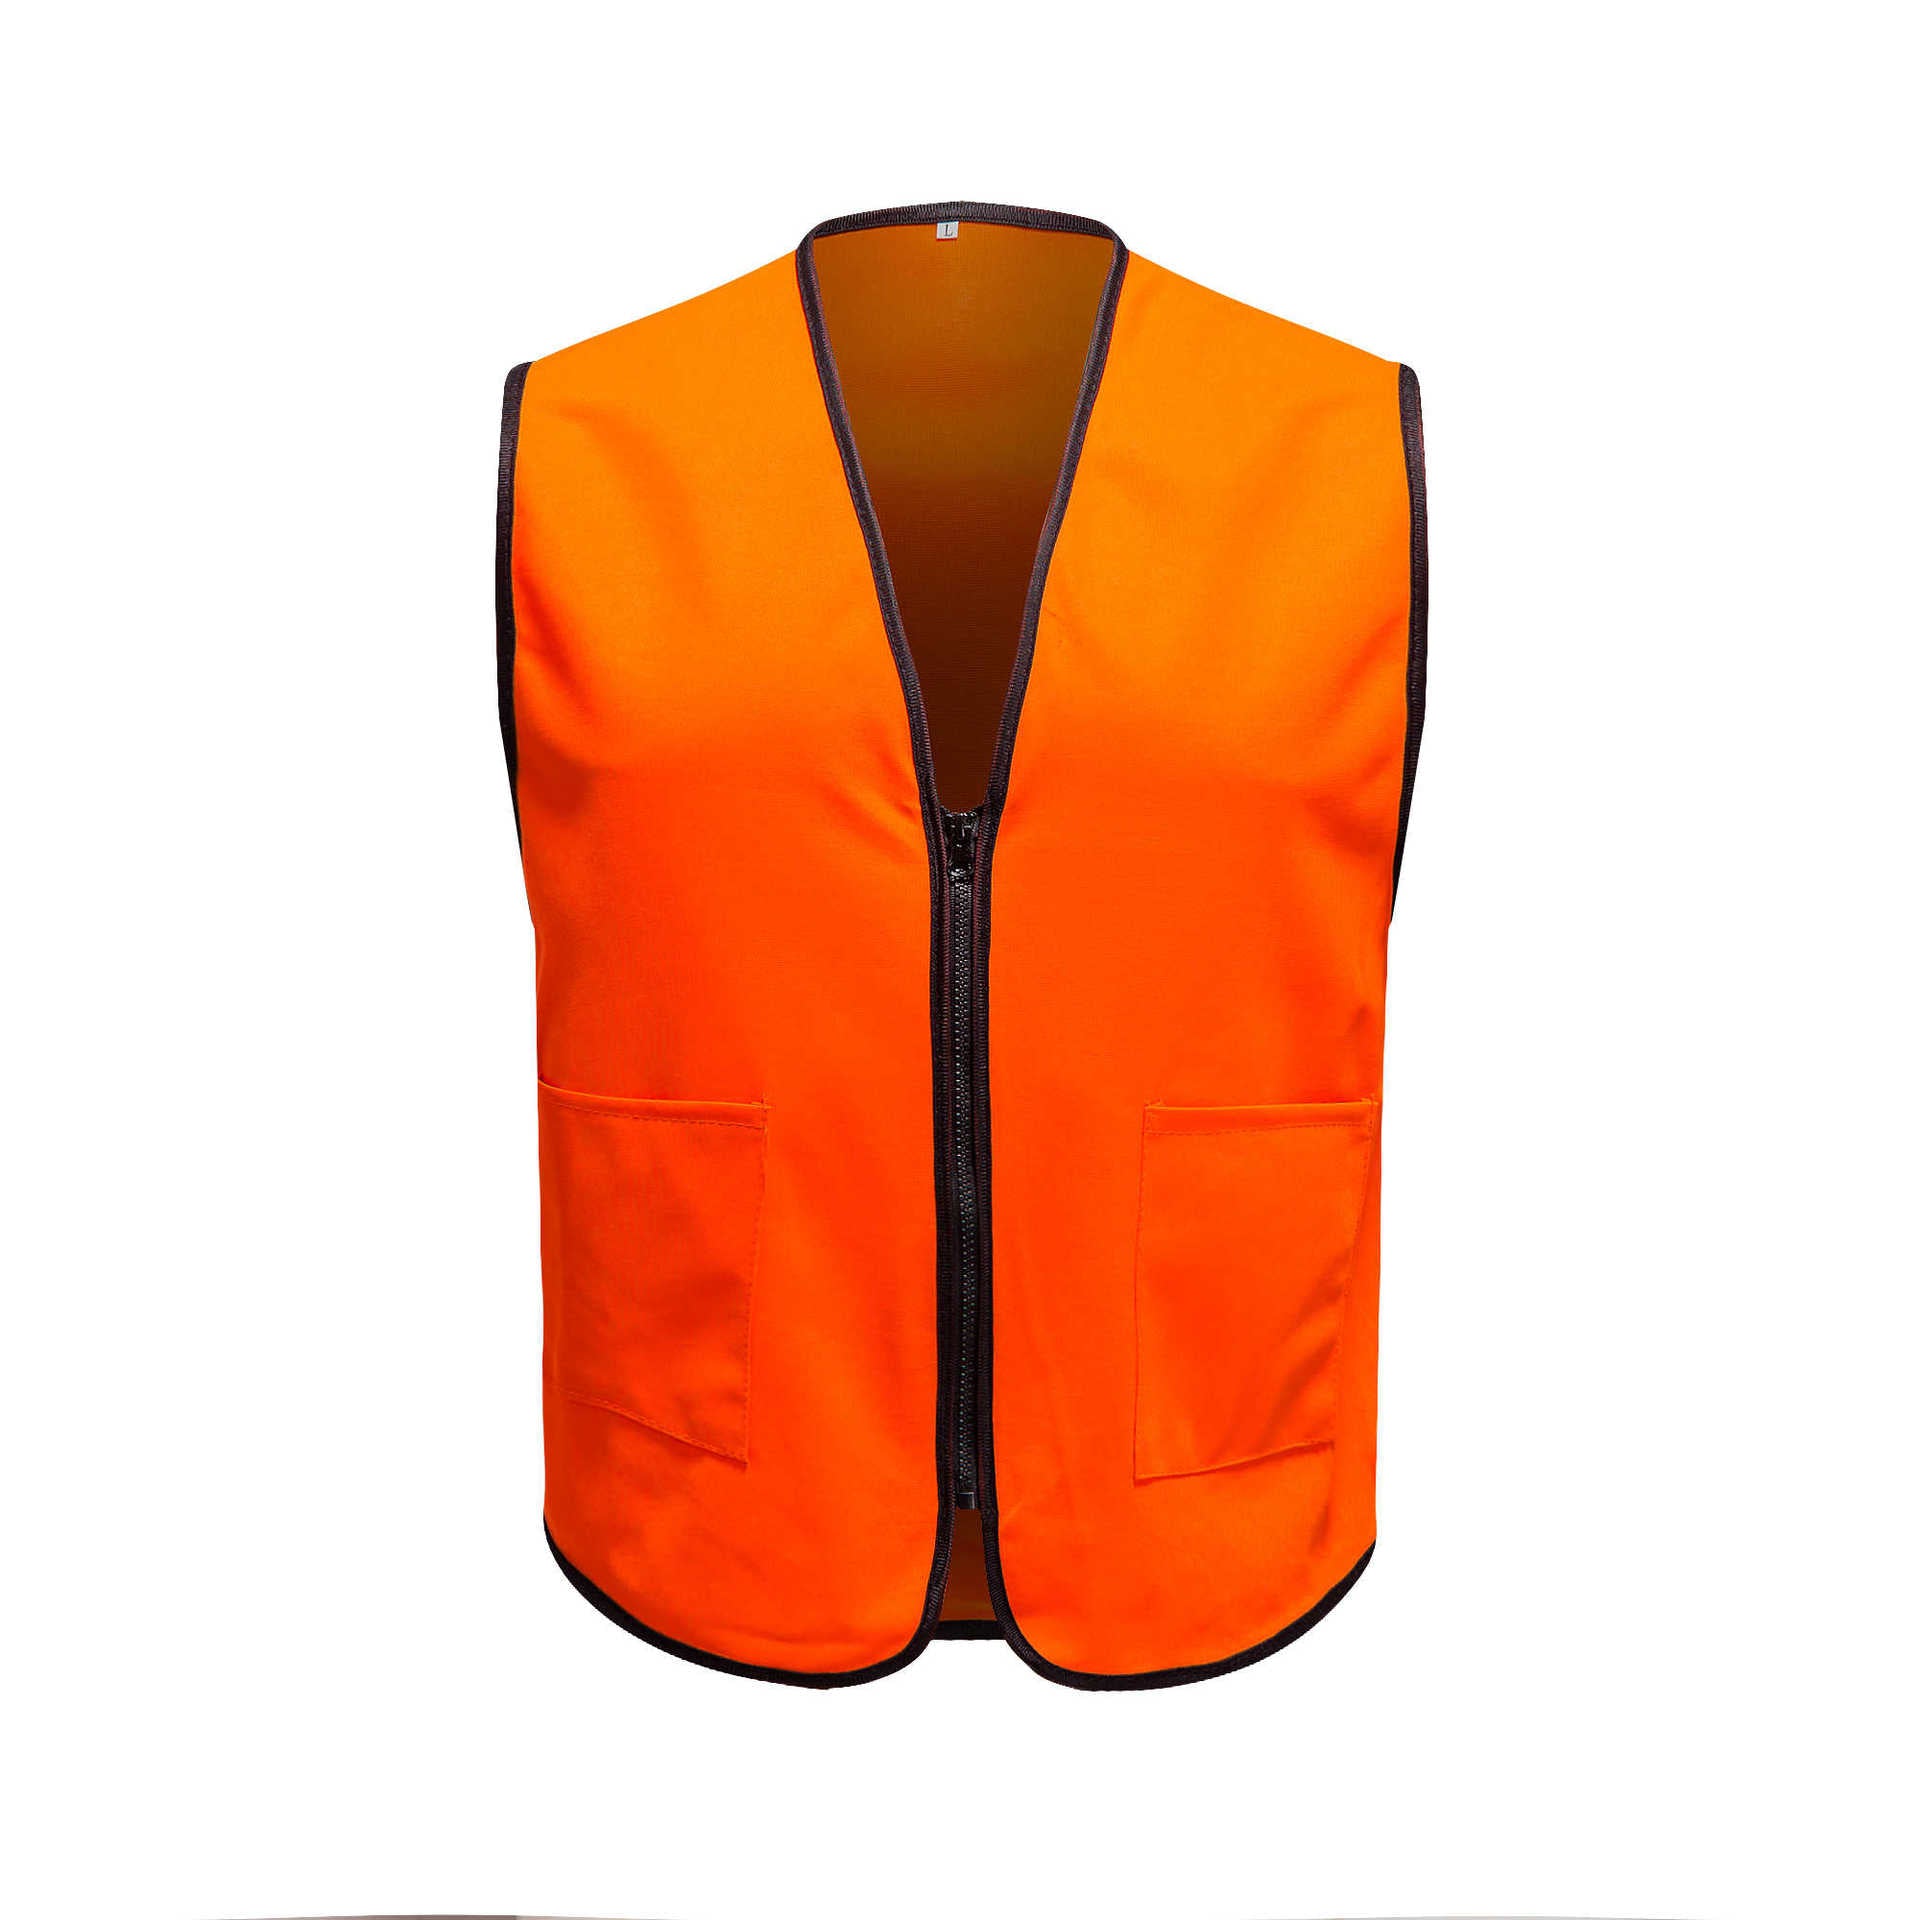 Sidiou Group Summer New Custom Sleeveless Thin Breathable Work Vest Advertising Promotional Vests Customized Vests With Embroidered Logo